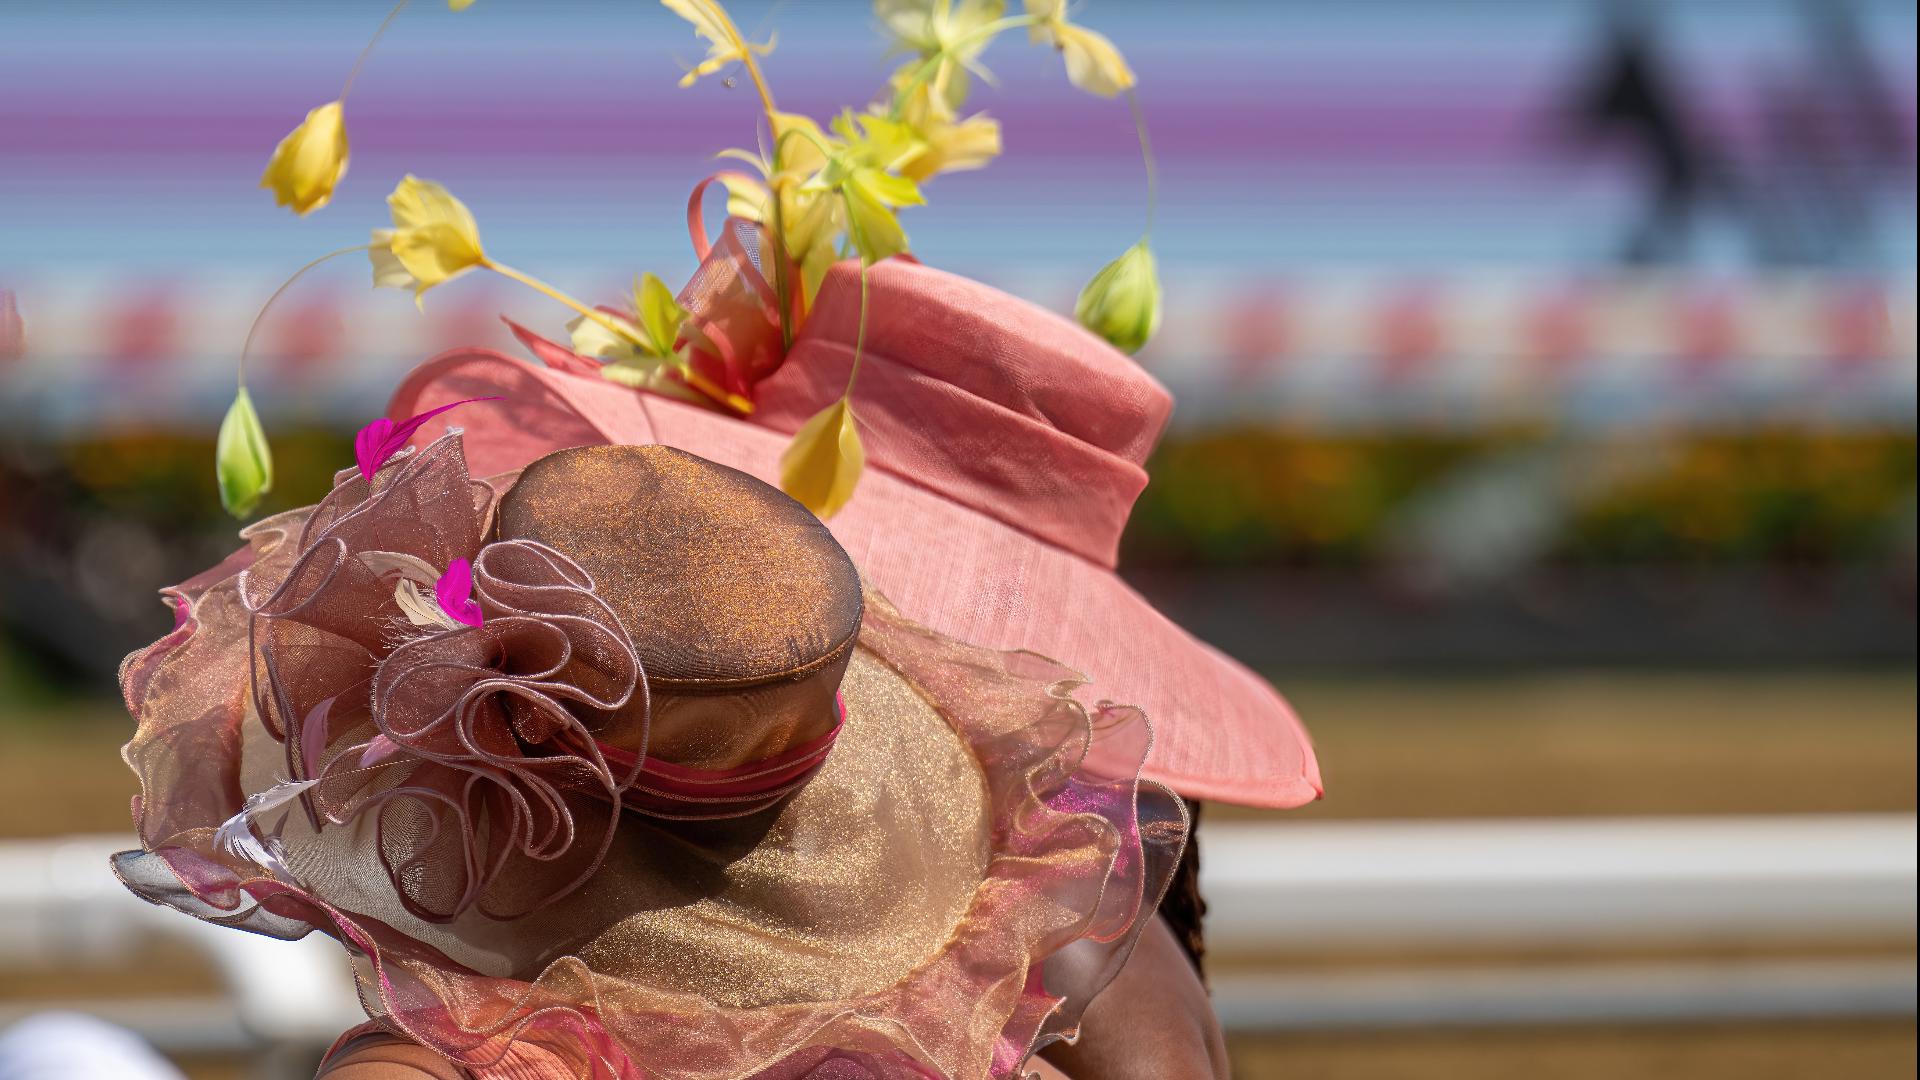 Stylist Lana Rae discusses the latest fashion trends for men and women ahead of the 149th running of the Preakness Stakes.